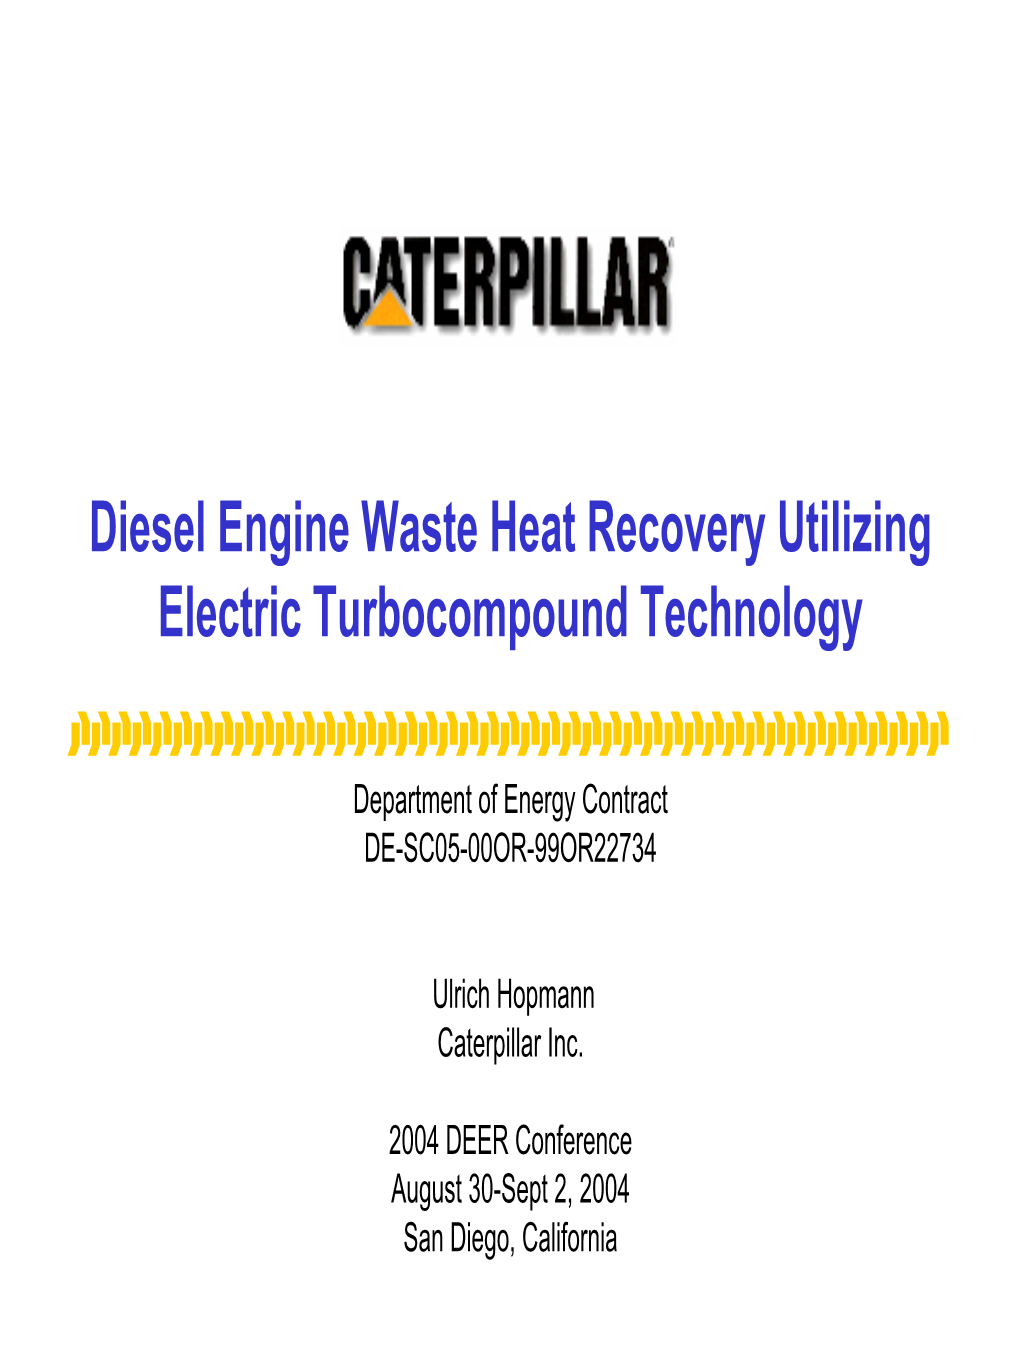 Diesel Engine Waste Heat Recovery Utilizing Electric Turbocompound Technology